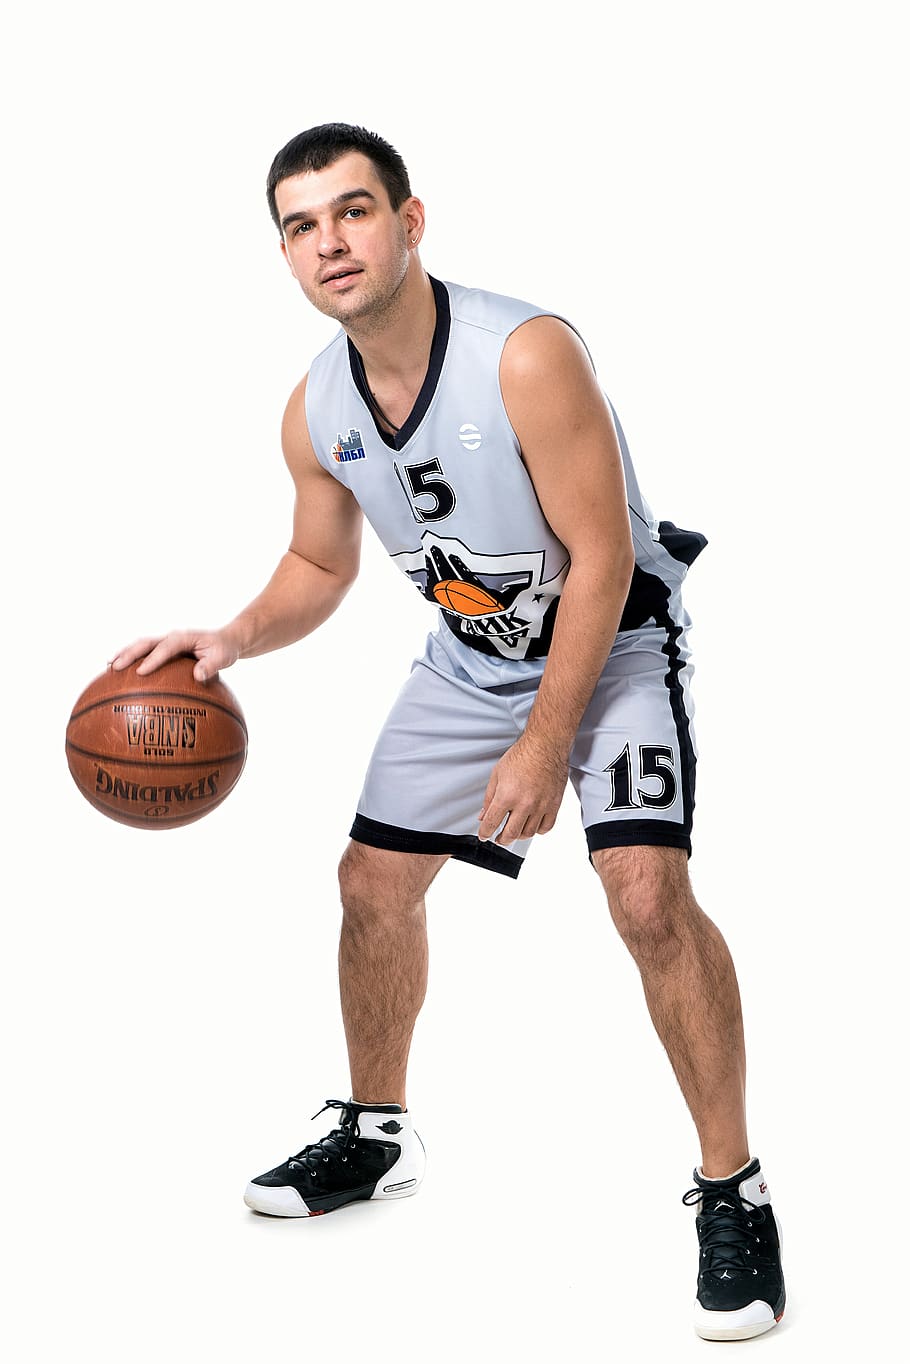 young, man, sports, a successful person, basketball, basketball player, photoshoot, white background, ball, background